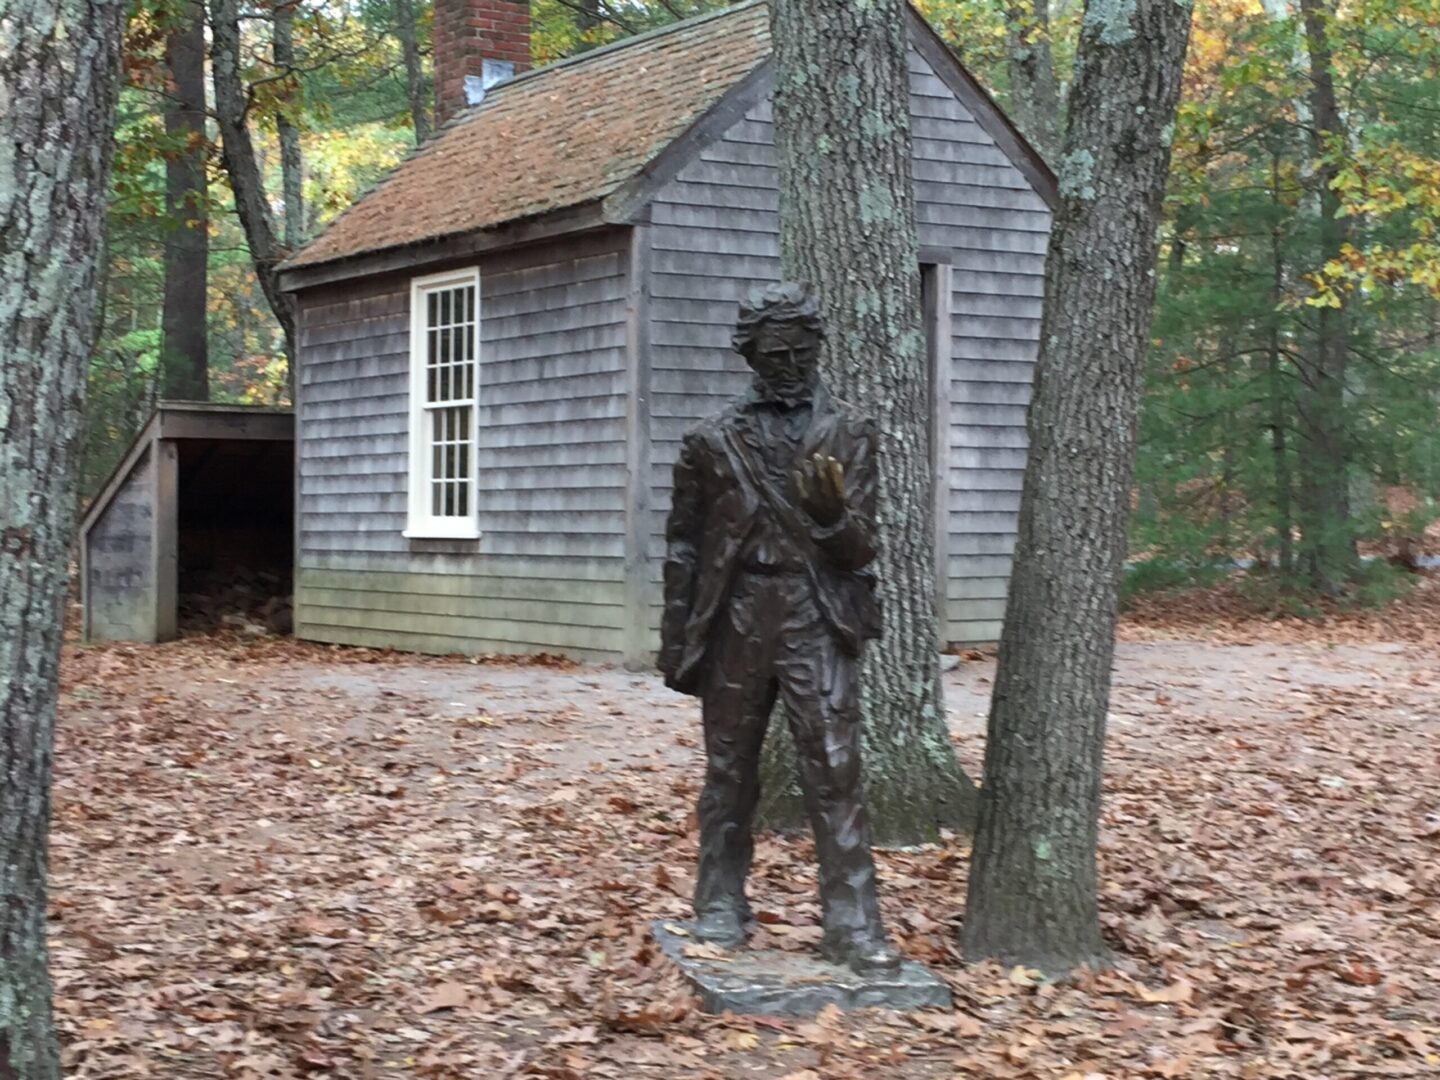 A statue of a man in front of a cabin.